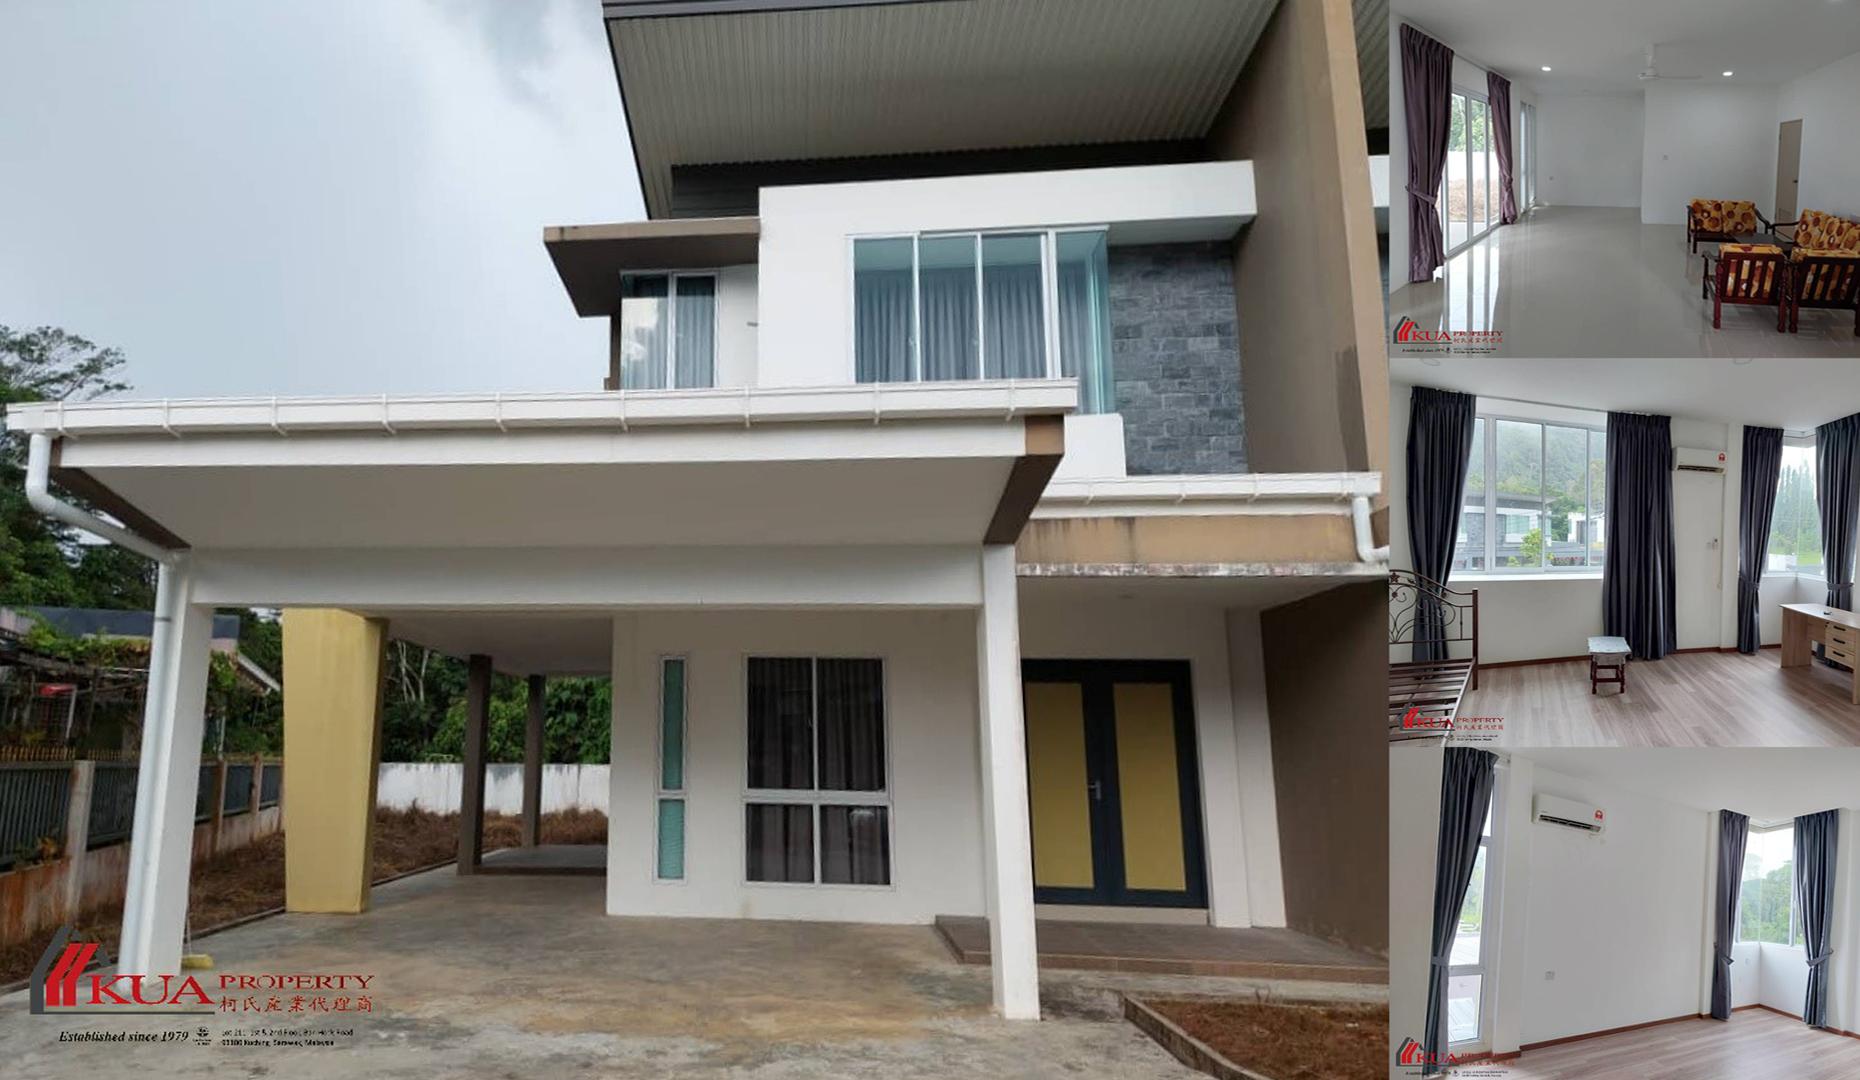 Double Storey Semi-Detached House FOR RENT! Located at Taman Pasir, Serian